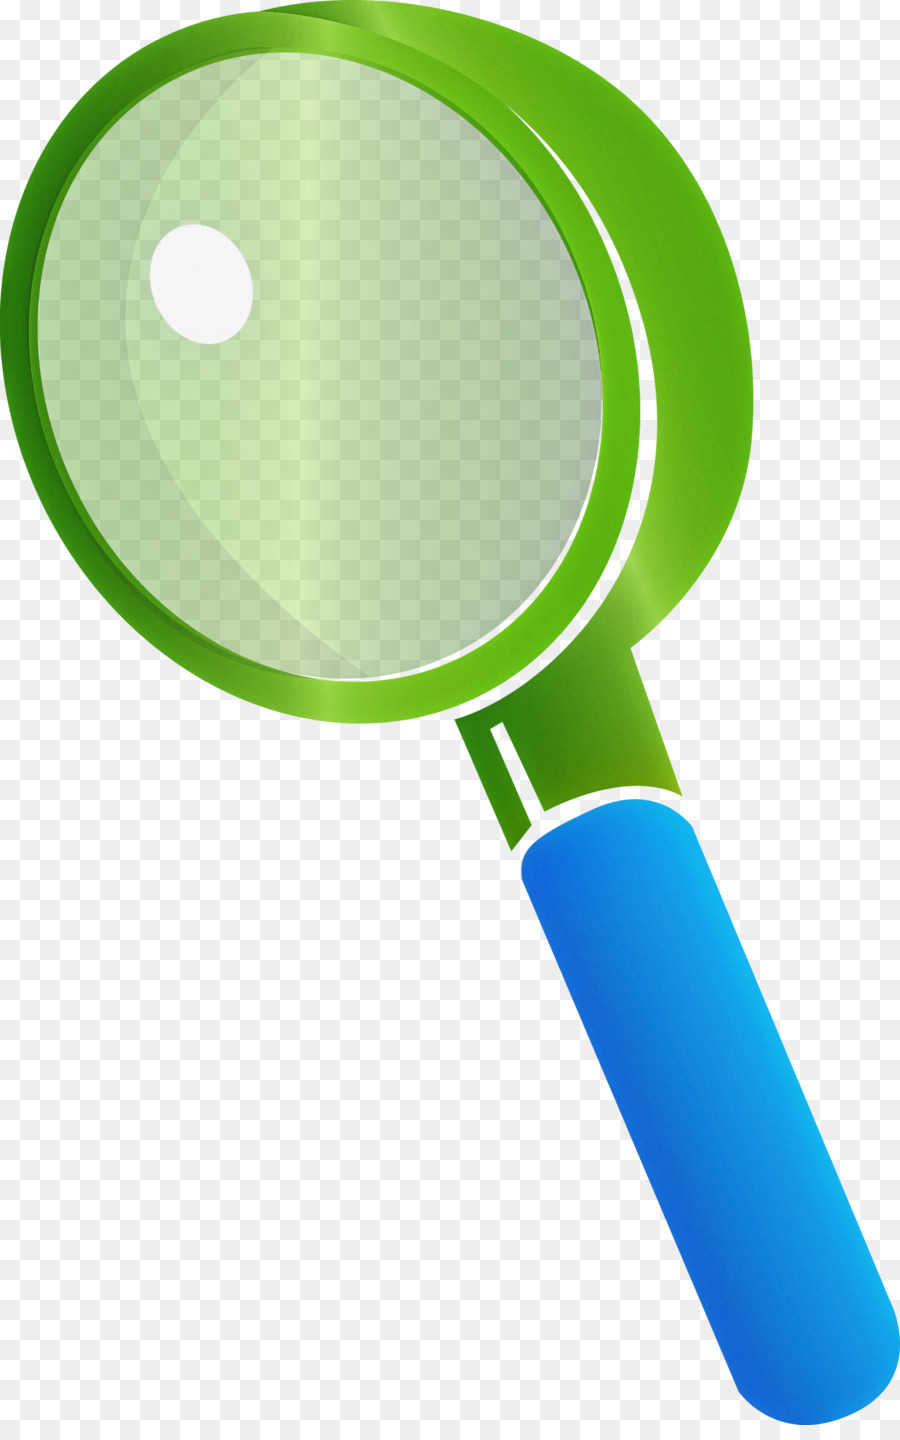 Magnifying glass magnifier